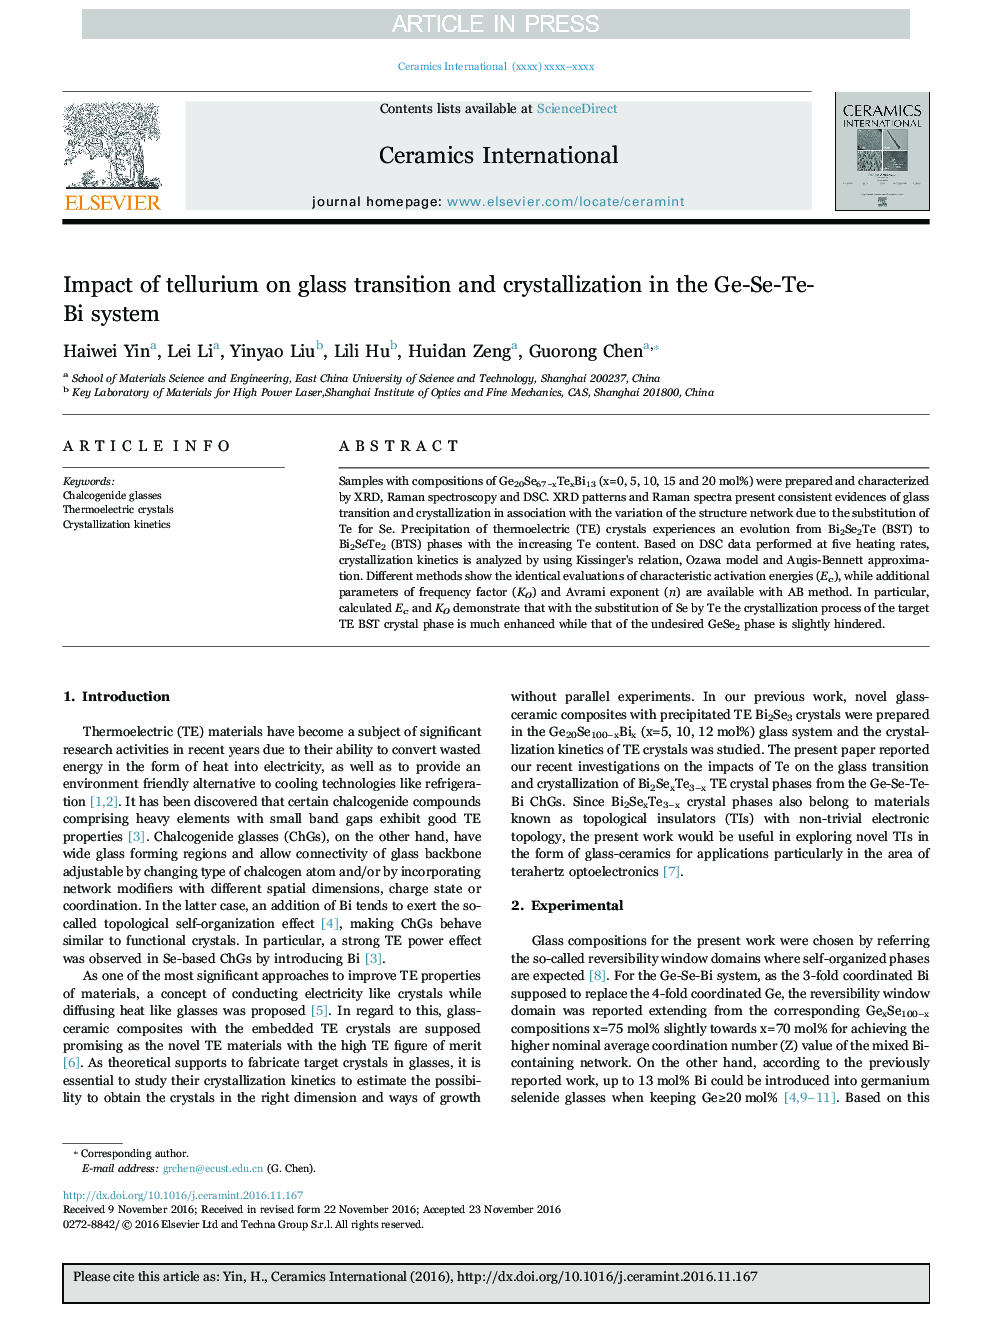 Impact of tellurium on glass transition and crystallization in the Ge-Se-Te-Bi system